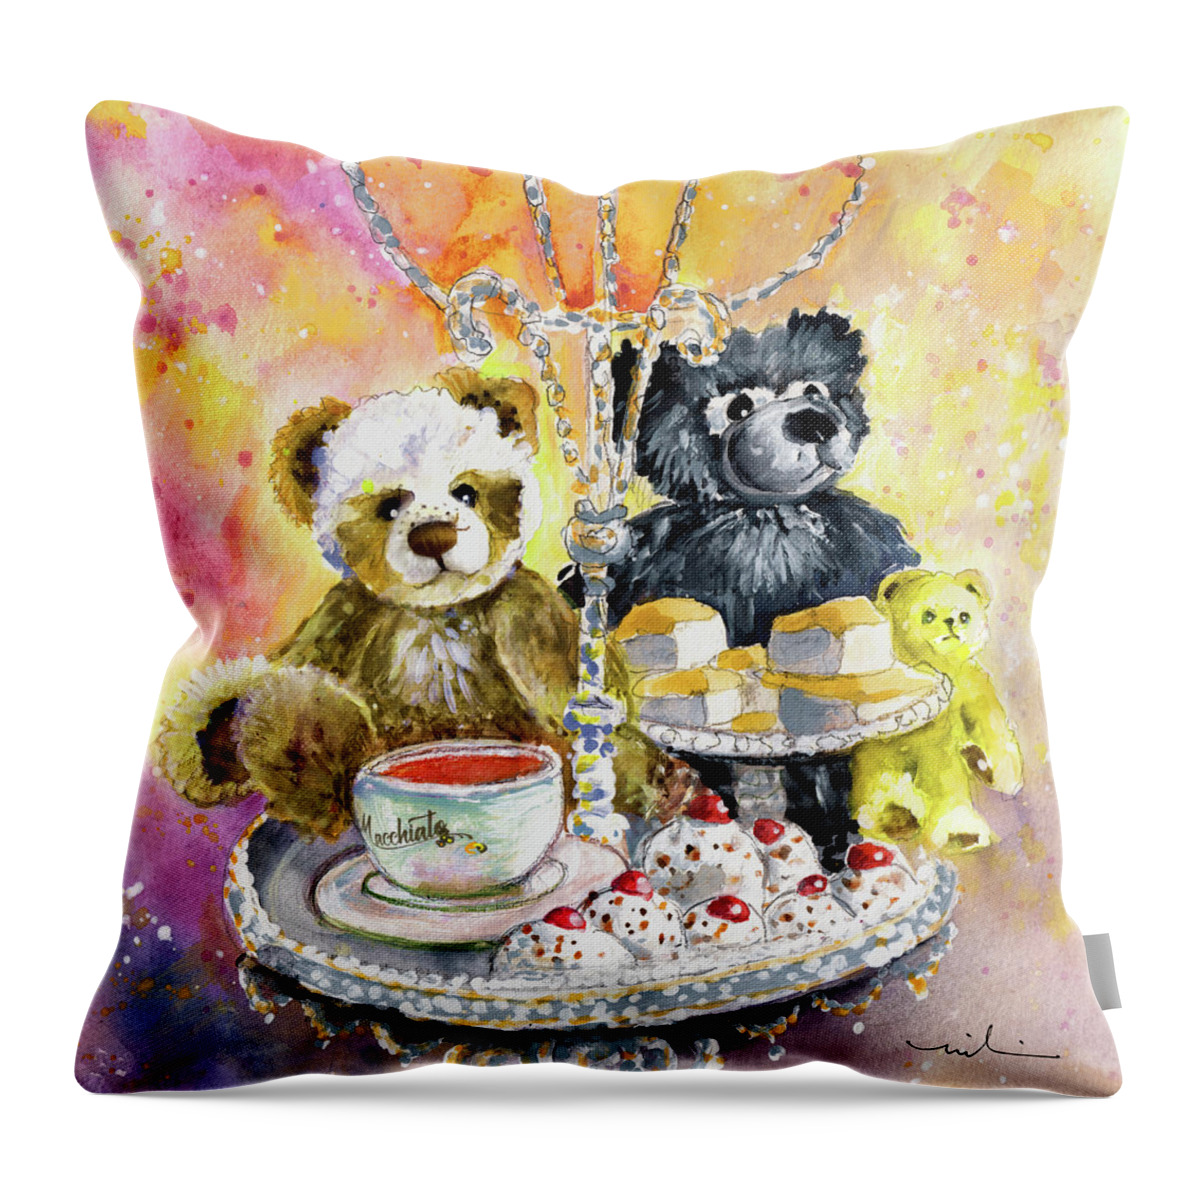 Teddy Throw Pillow featuring the painting Charlie Bears Hot Cross Bun And Dreamer by Miki De Goodaboom